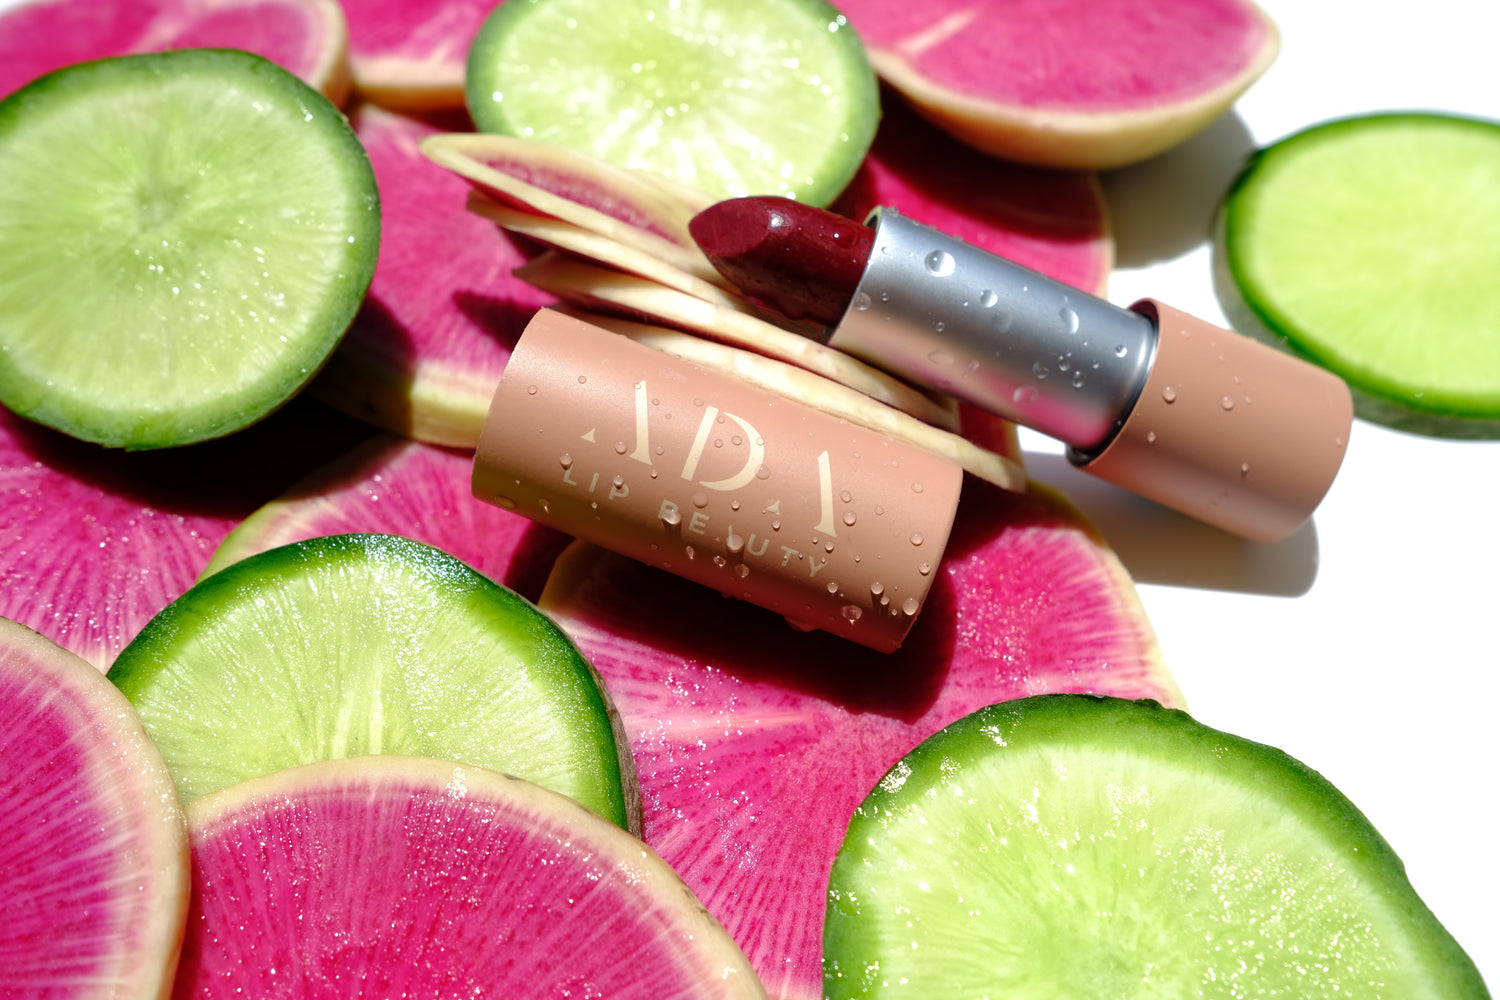 natural, clean, vegan lipstick pigmented with vegetables like beets, potatoes, turmeric, spirulina, and radish. Plant-based and nontoxic makeup 